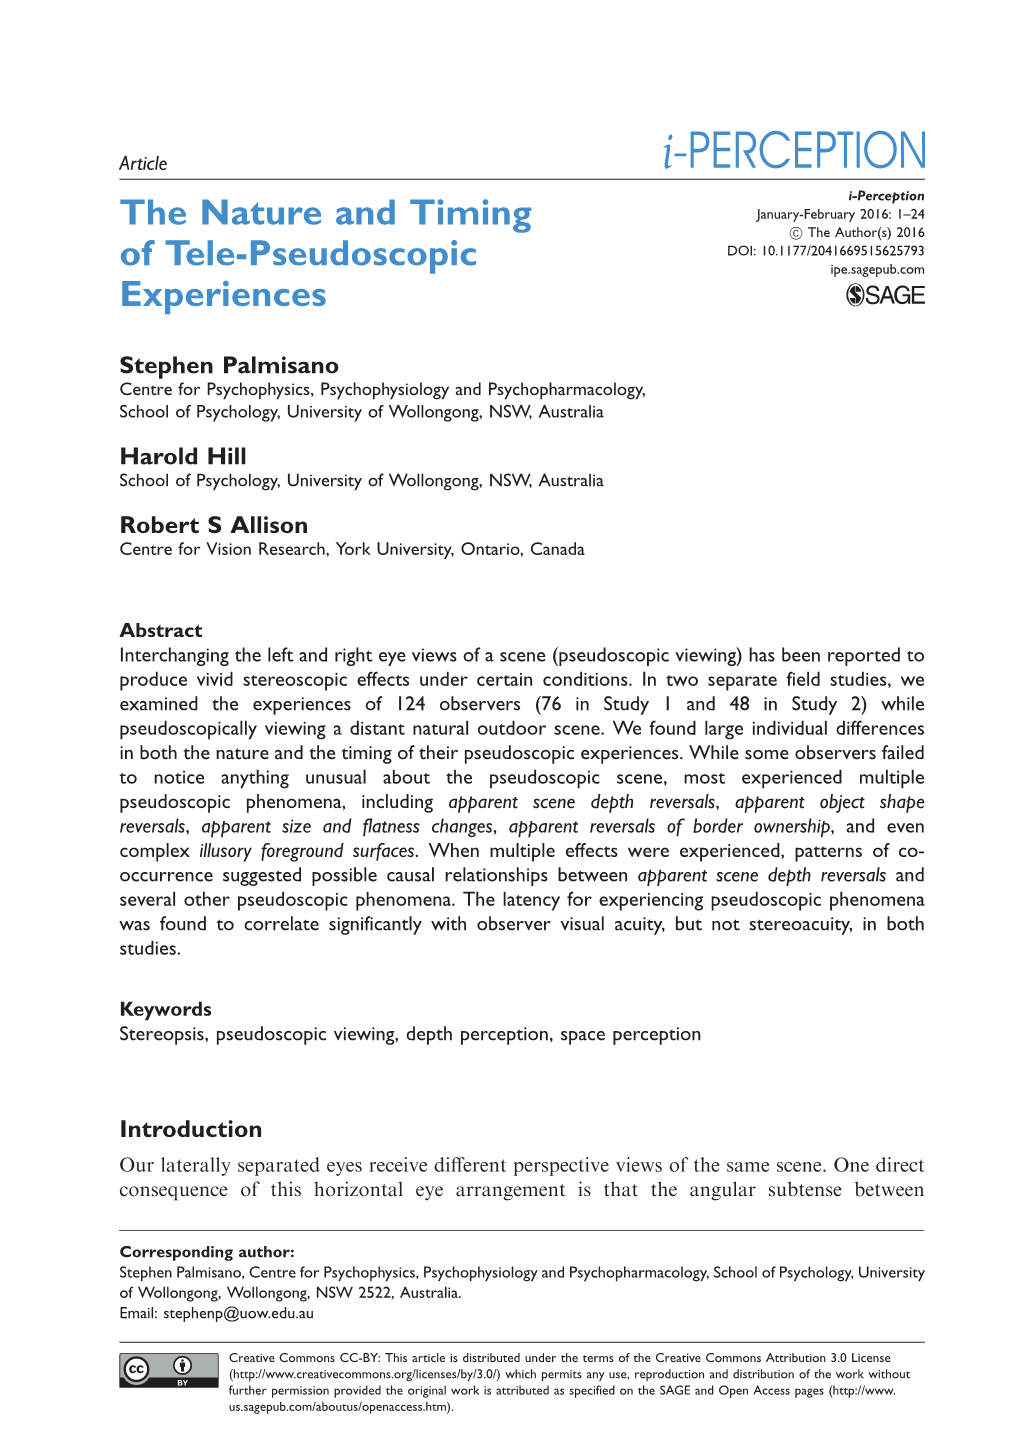 The Nature and Timing of Tele-Pseudoscopic